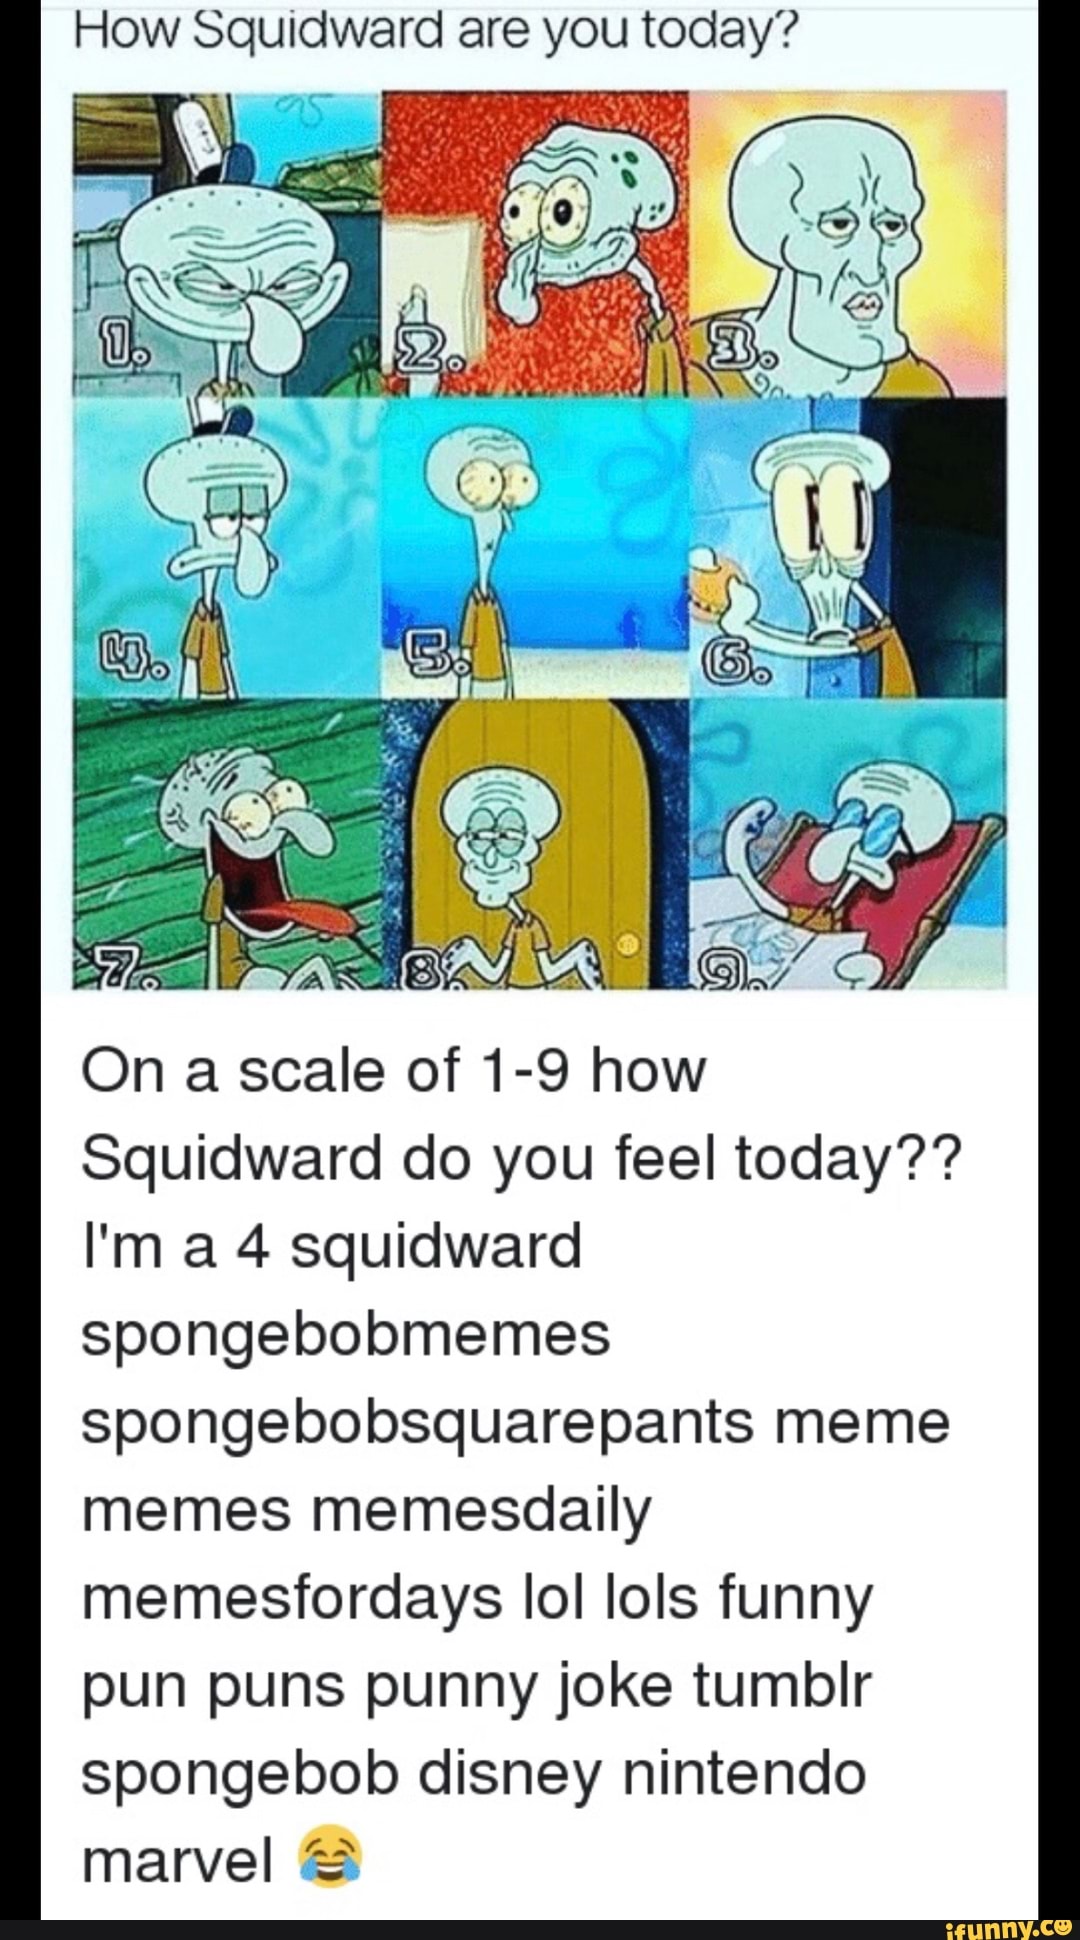 How Squidward Are You Today On A Scale Of 1 9 How Squidward Do You Feel Today I M A 4 Squidward Spongebobmemes Spongebobsquarepants Meme Memes Memesdaily Memesfordays Ioi Iols Funny Pun Puns Punny